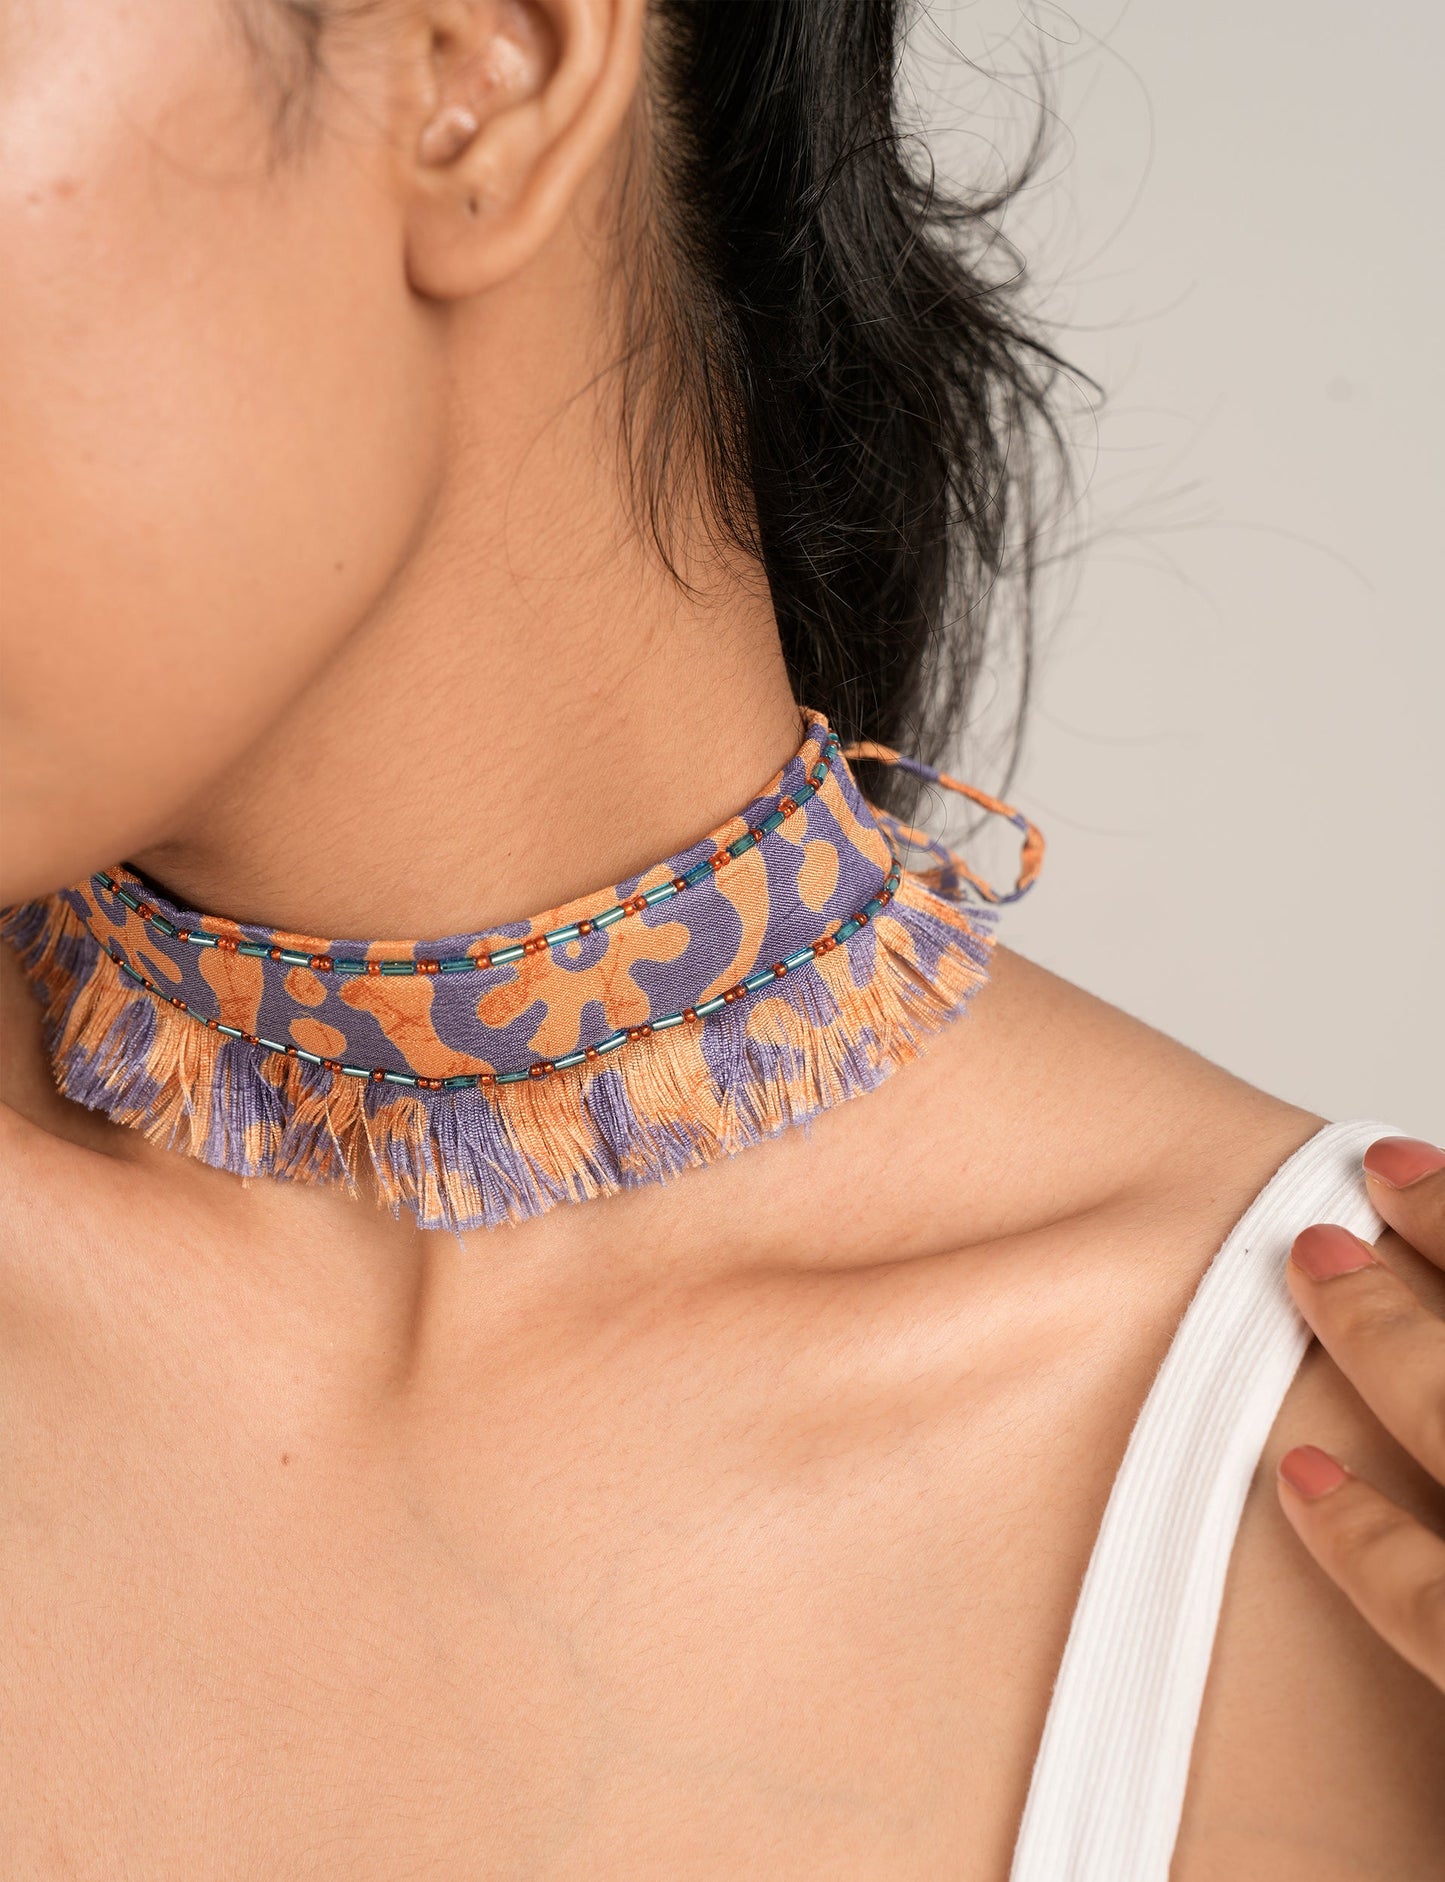 Discover the charm of our Tie-Up Fringe Choker, a meticulously crafted necklace with sari fringe edging and a tie-up back. Adorned with Indian salli beads by skilled female artisans in Mumbai, this accessory embodies ethical fashion and sustainable elegance.